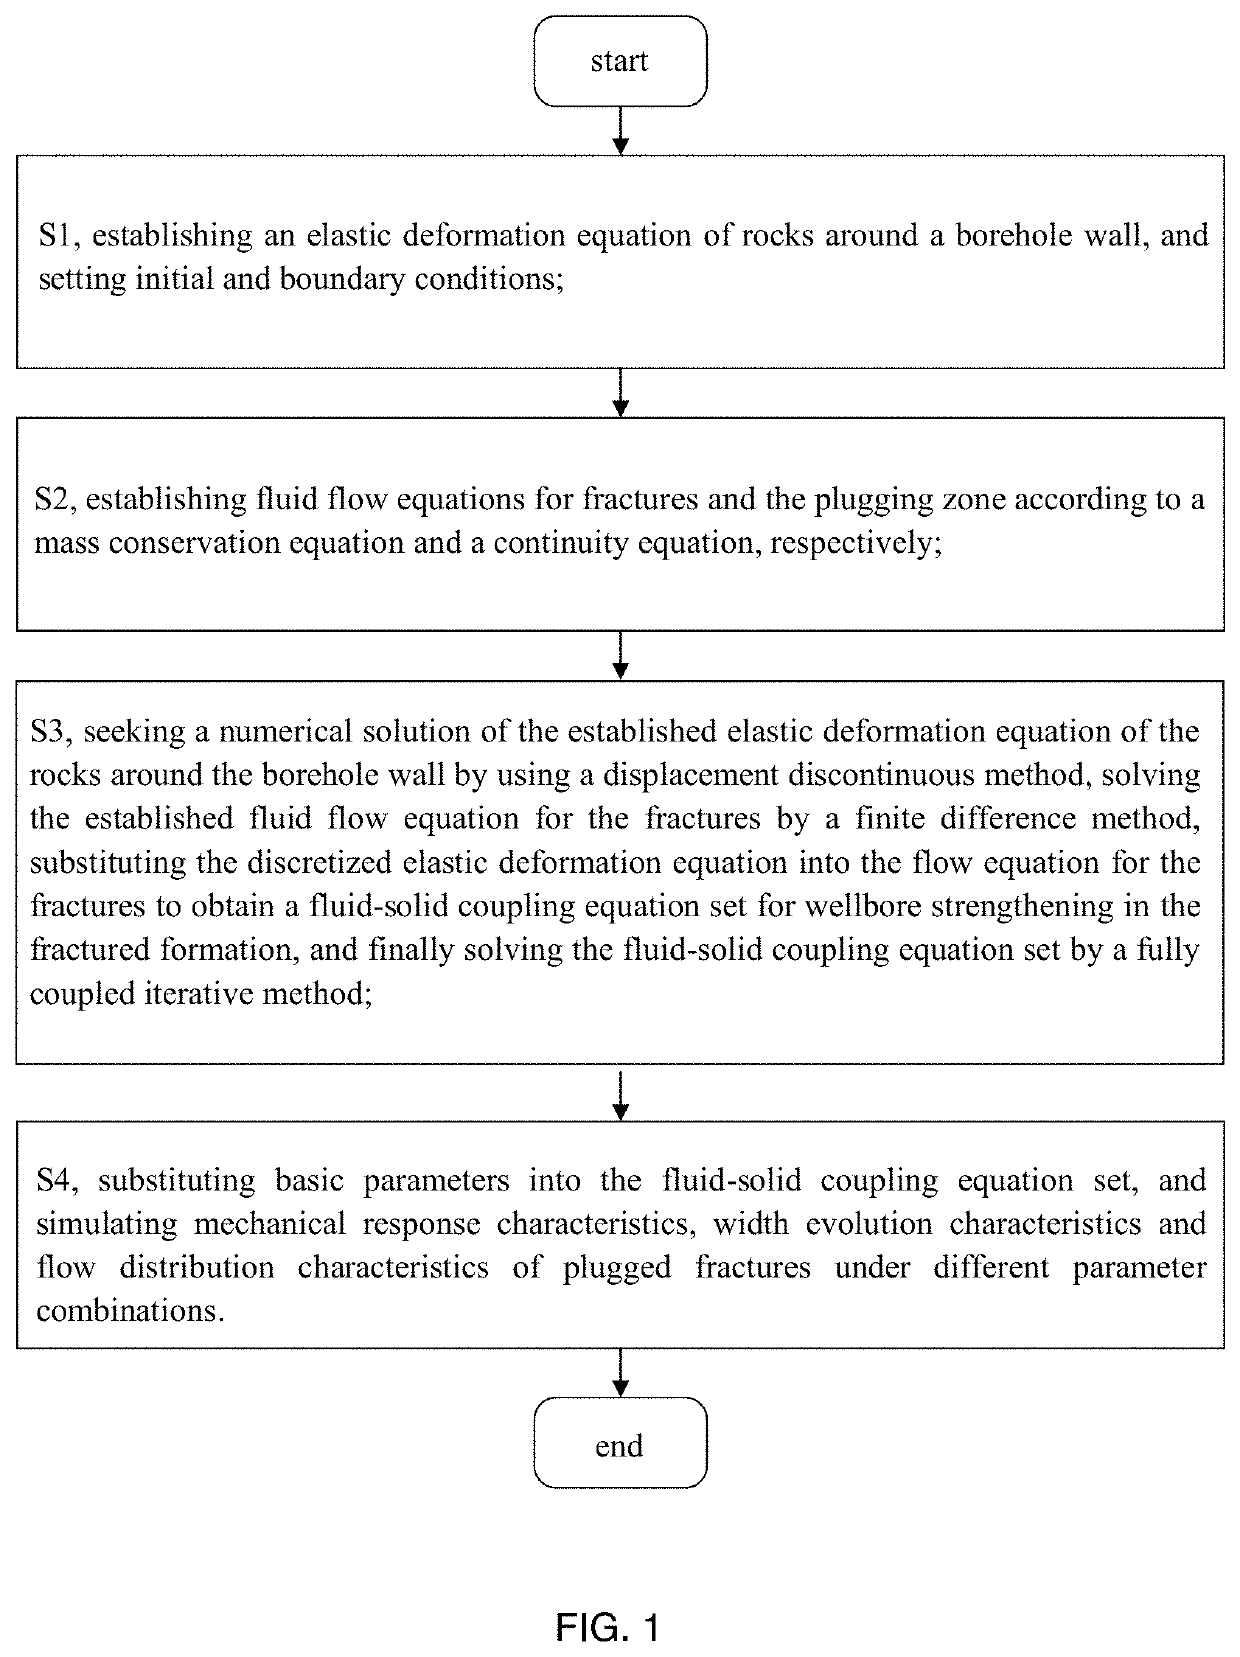 Fluid-solid coupling numerical simulation method for evaluating effect of wellbore strengthening in fractured formation